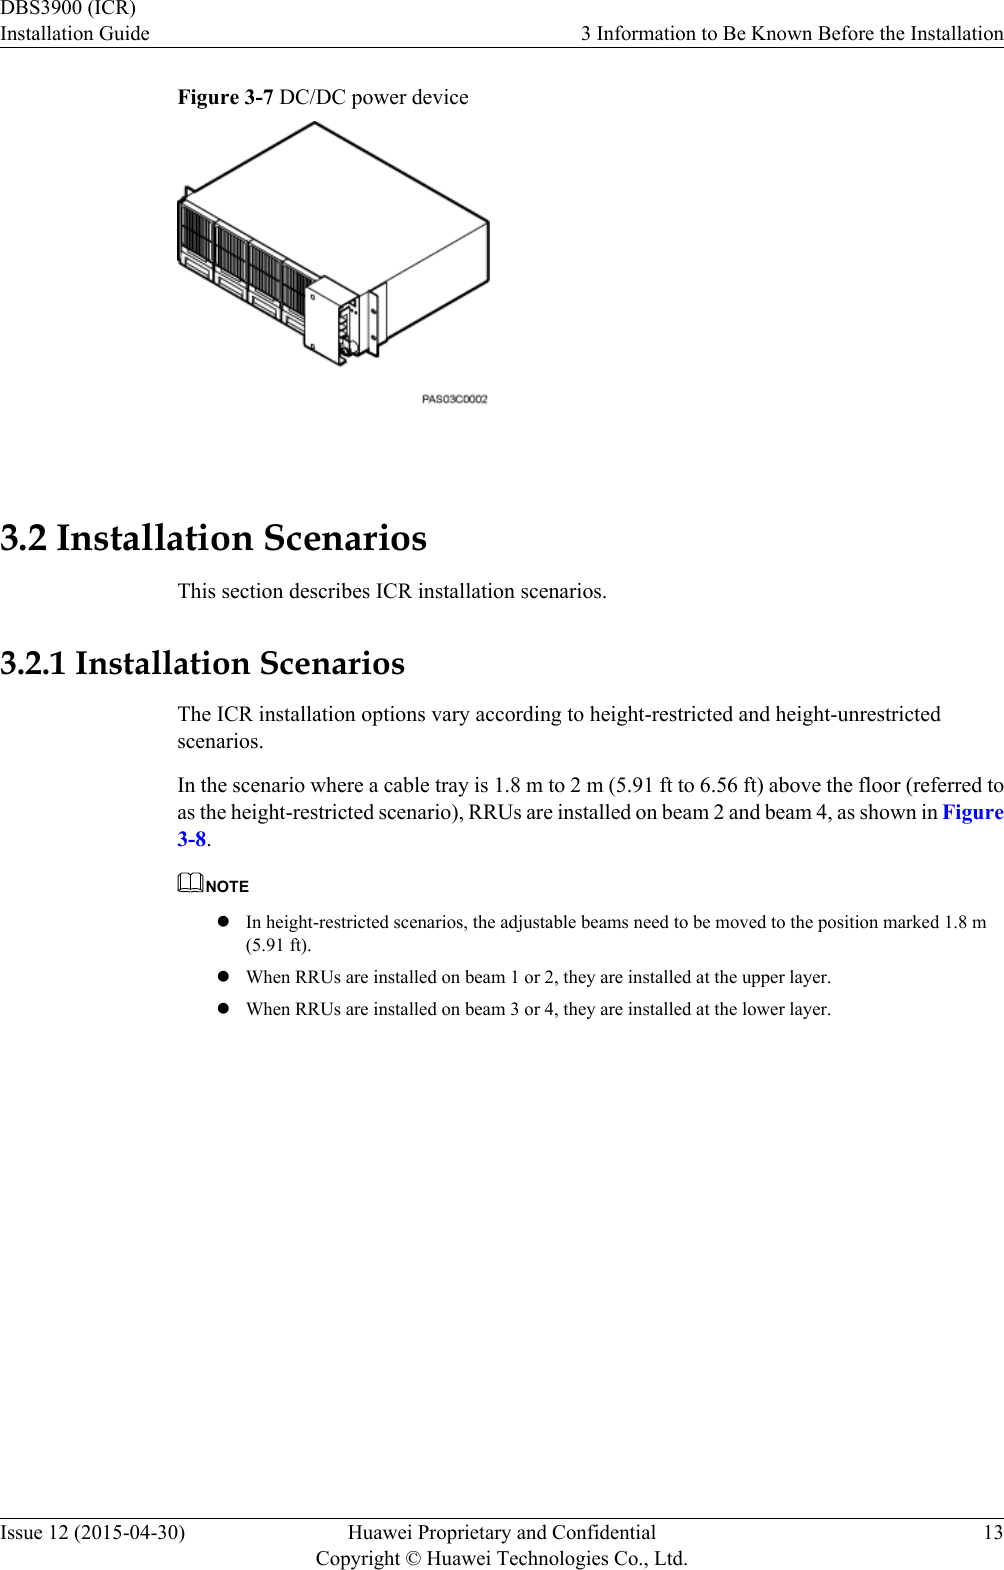 Figure 3-7 DC/DC power device 3.2 Installation ScenariosThis section describes ICR installation scenarios.3.2.1 Installation ScenariosThe ICR installation options vary according to height-restricted and height-unrestrictedscenarios.In the scenario where a cable tray is 1.8 m to 2 m (5.91 ft to 6.56 ft) above the floor (referred toas the height-restricted scenario), RRUs are installed on beam 2 and beam 4, as shown in Figure3-8.NOTElIn height-restricted scenarios, the adjustable beams need to be moved to the position marked 1.8 m(5.91 ft).lWhen RRUs are installed on beam 1 or 2, they are installed at the upper layer.lWhen RRUs are installed on beam 3 or 4, they are installed at the lower layer.DBS3900 (ICR)Installation Guide 3 Information to Be Known Before the InstallationIssue 12 (2015-04-30) Huawei Proprietary and ConfidentialCopyright © Huawei Technologies Co., Ltd.13